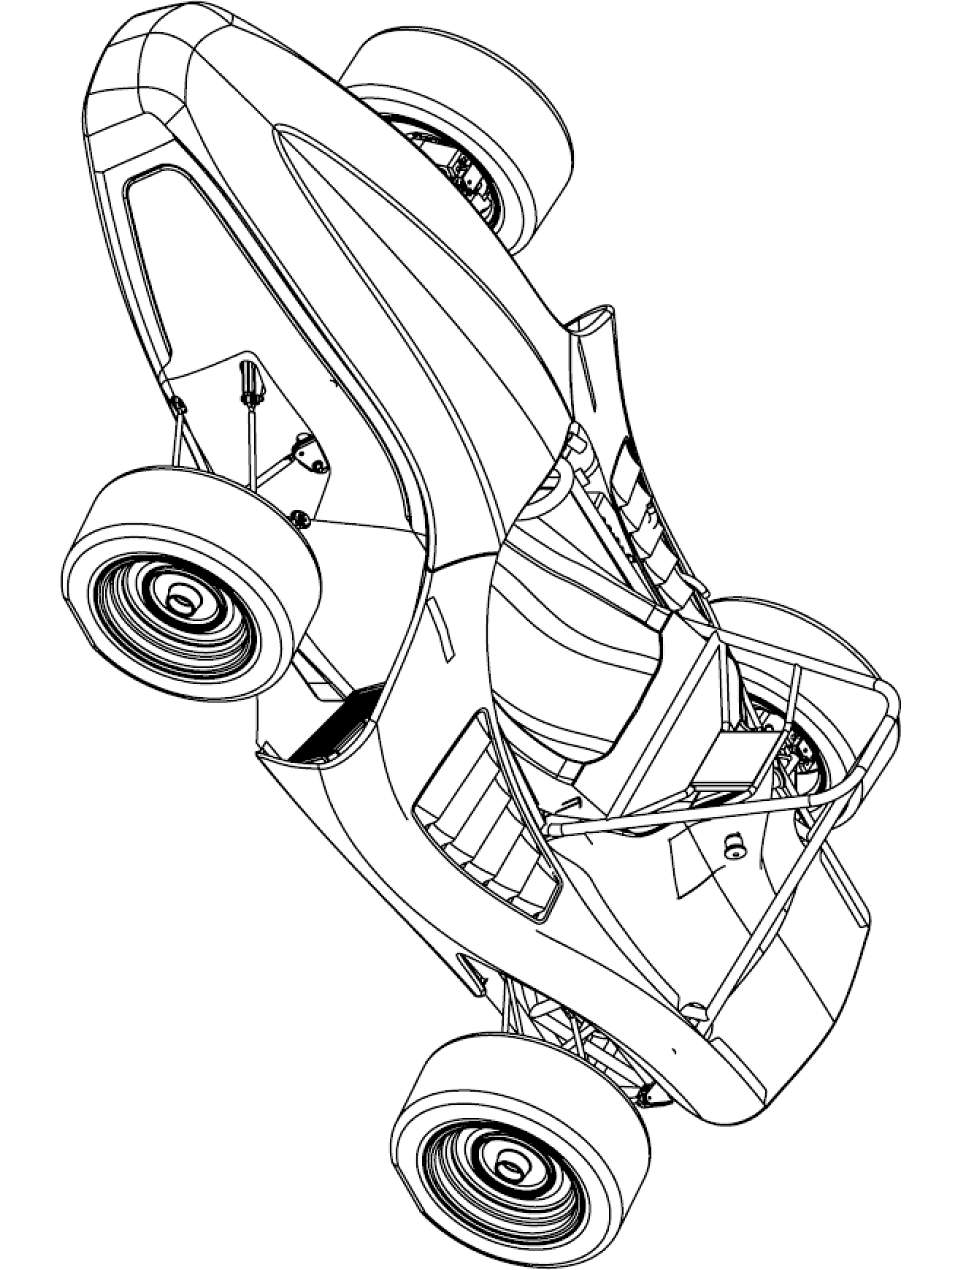 Go Kart Race Car Coloring Page - Free Printable Coloring Pages for Kids